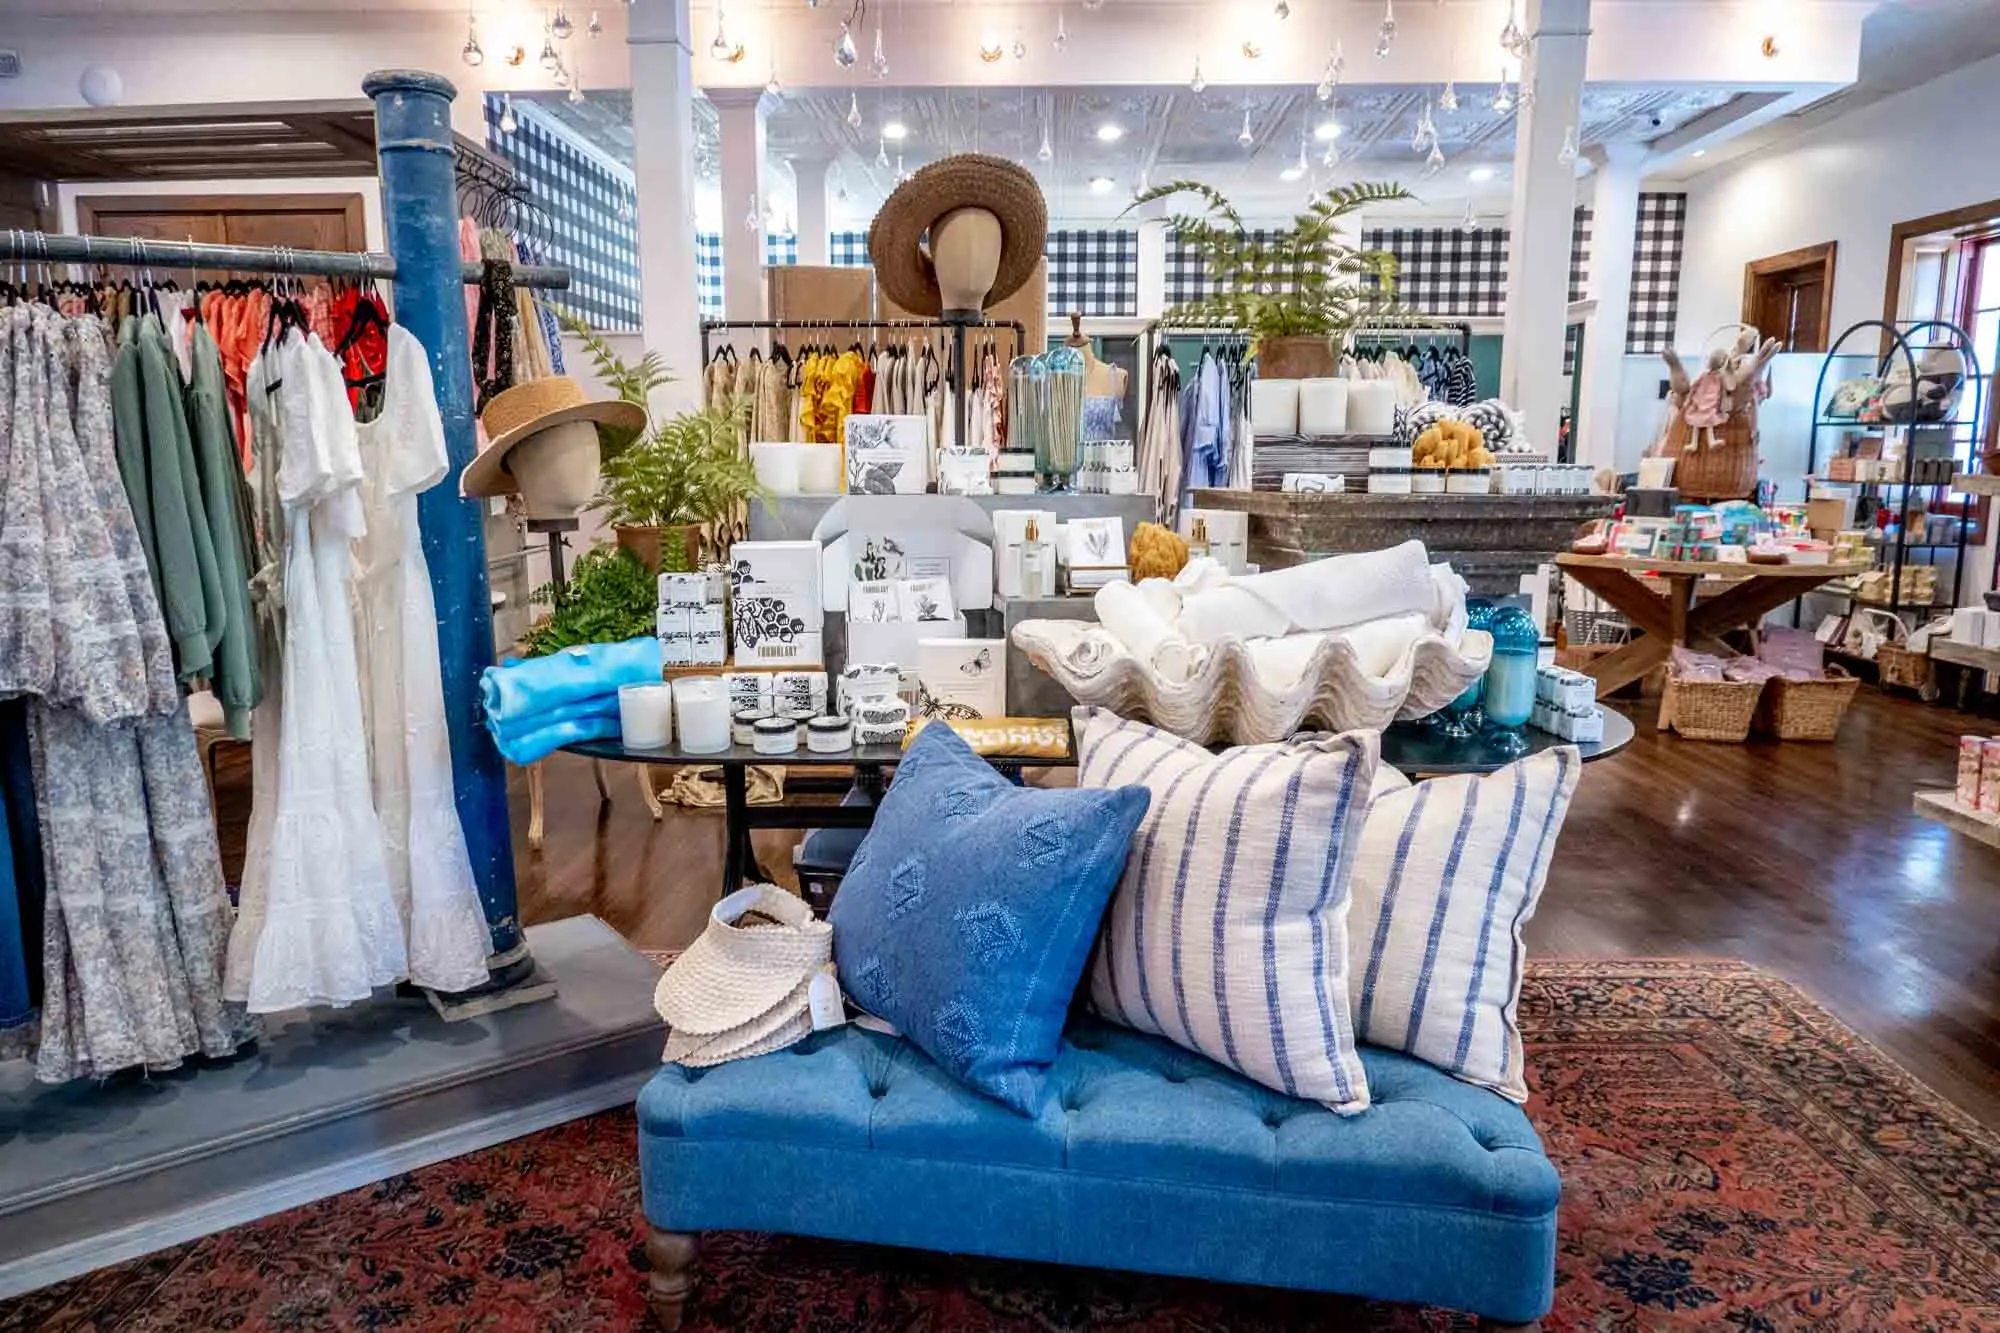 Dresses, pillows, and homegoods for sale in a boutique